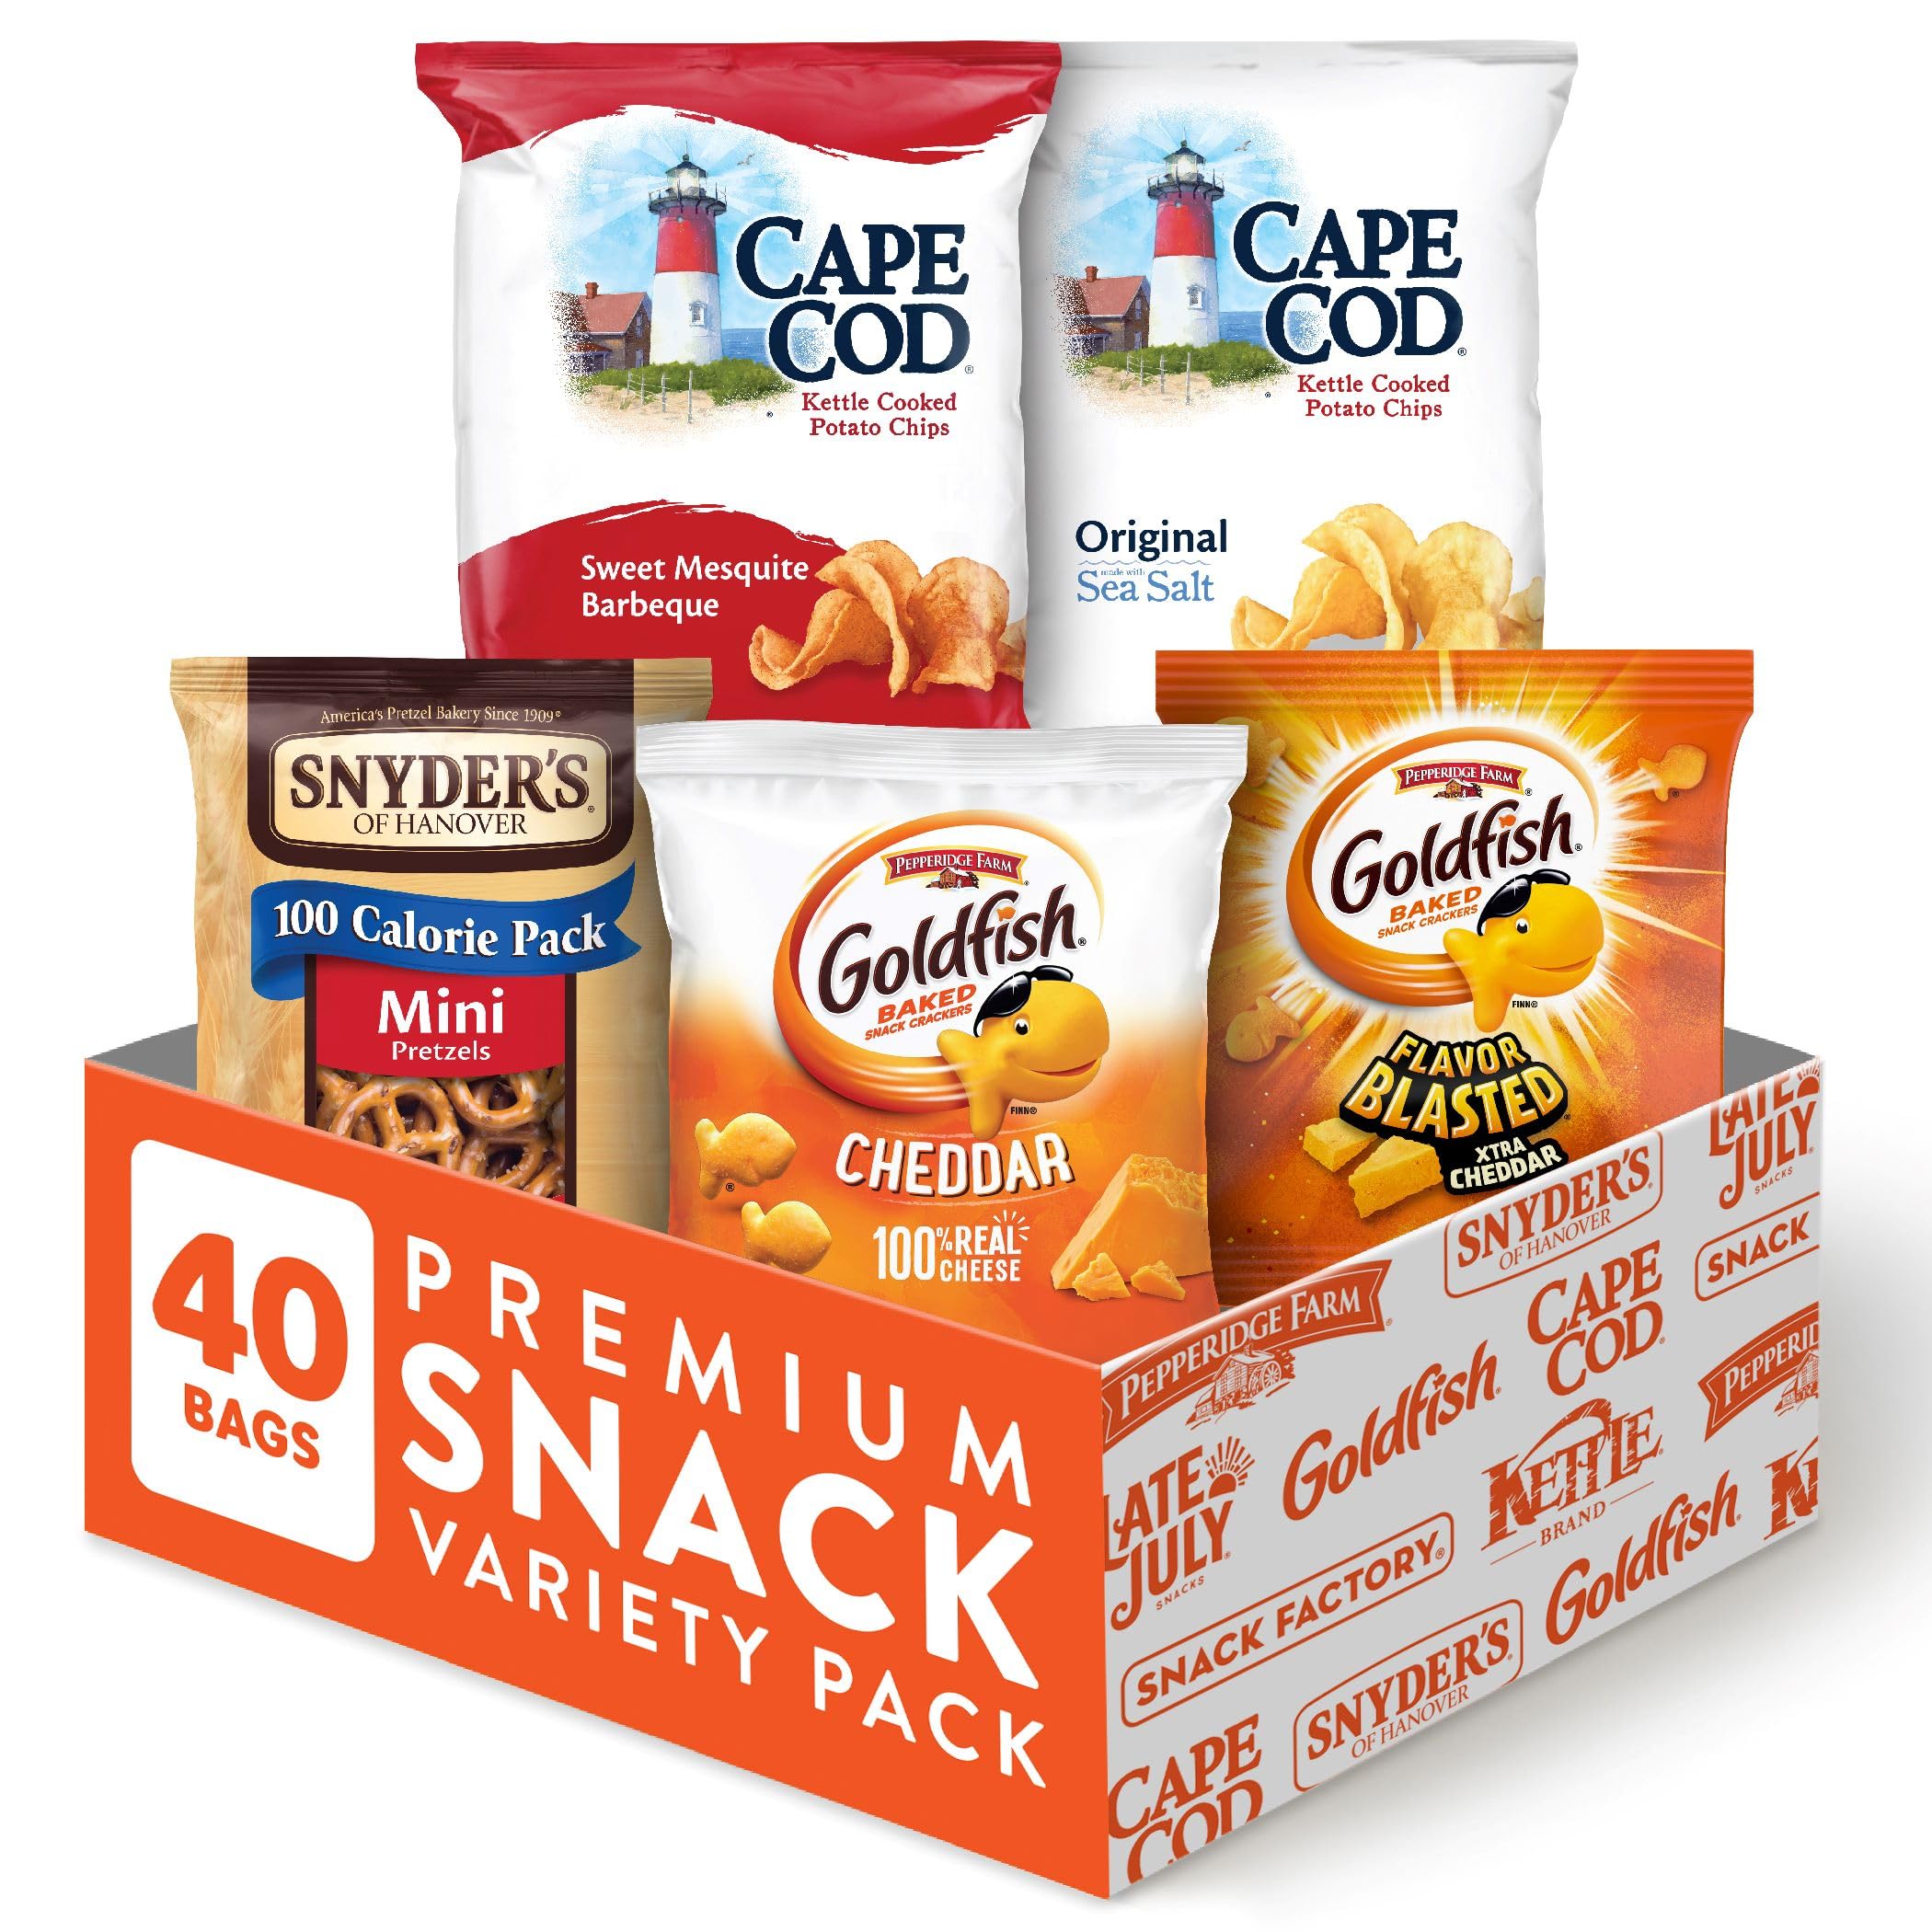 40-Count Snack Variety Pack: Goldfish Crackers, Snyder's of Hanover Pretzels, and Cape Cod Potato Chips $16.64